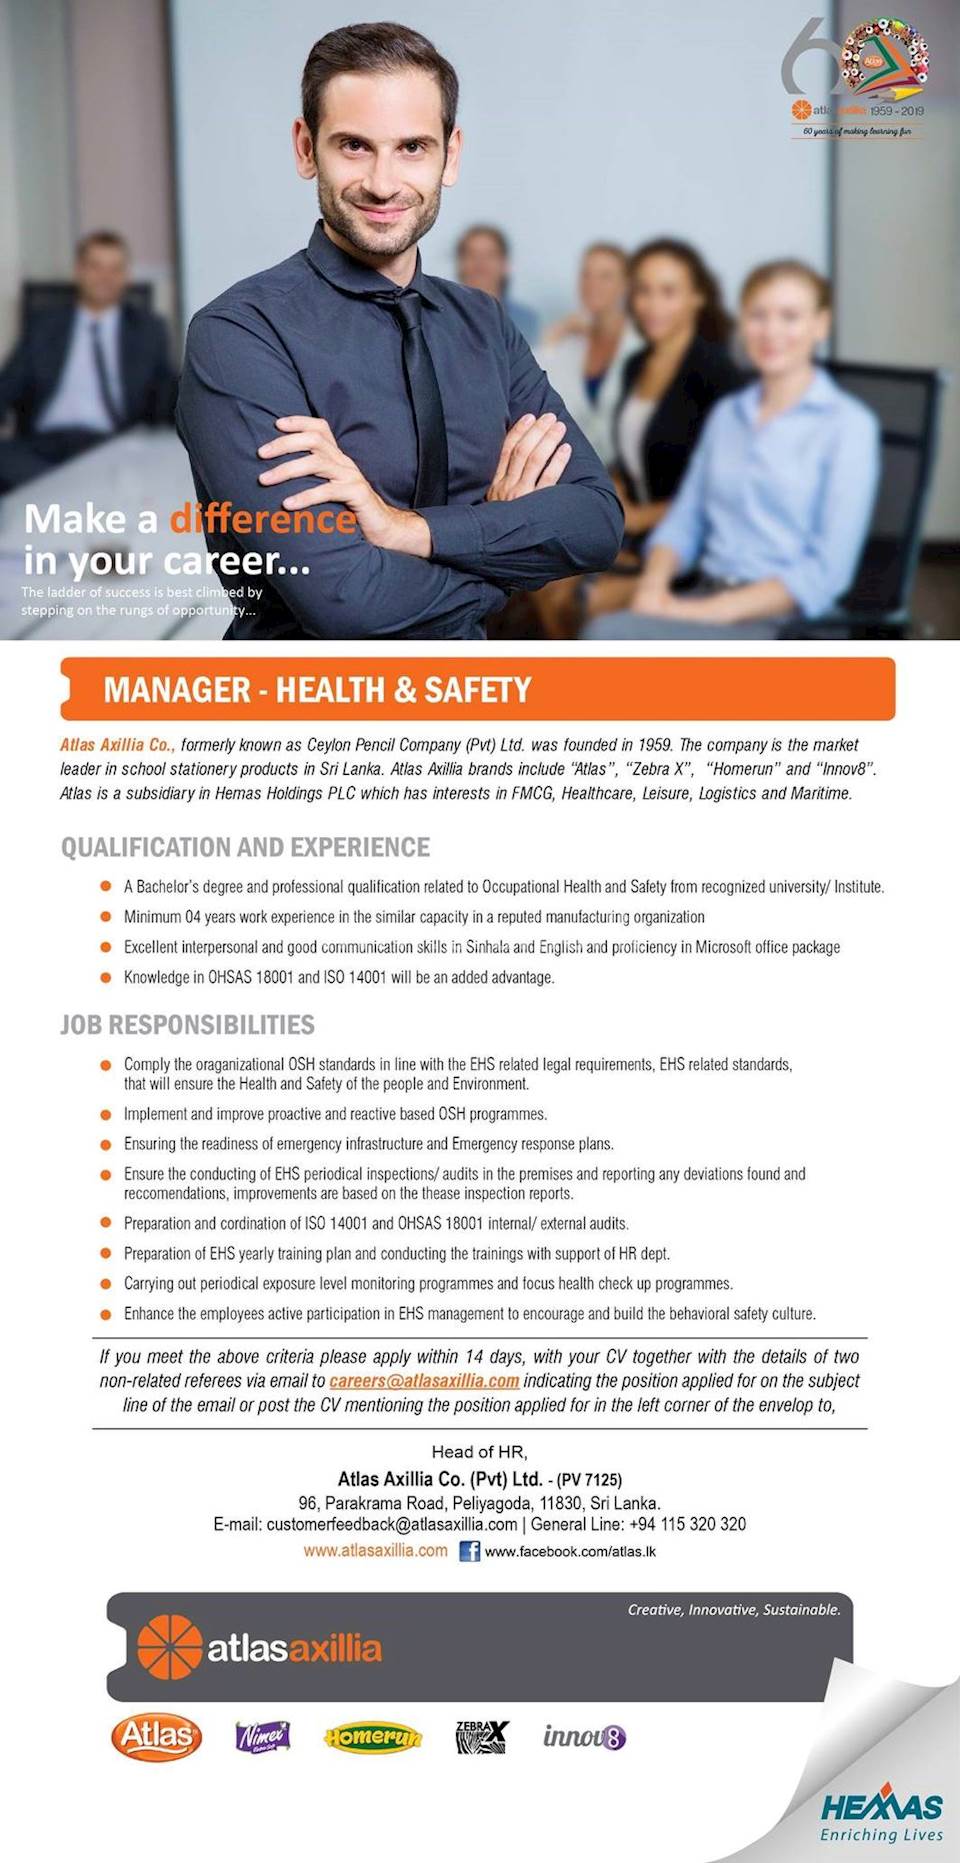 Manager - Health & Safety